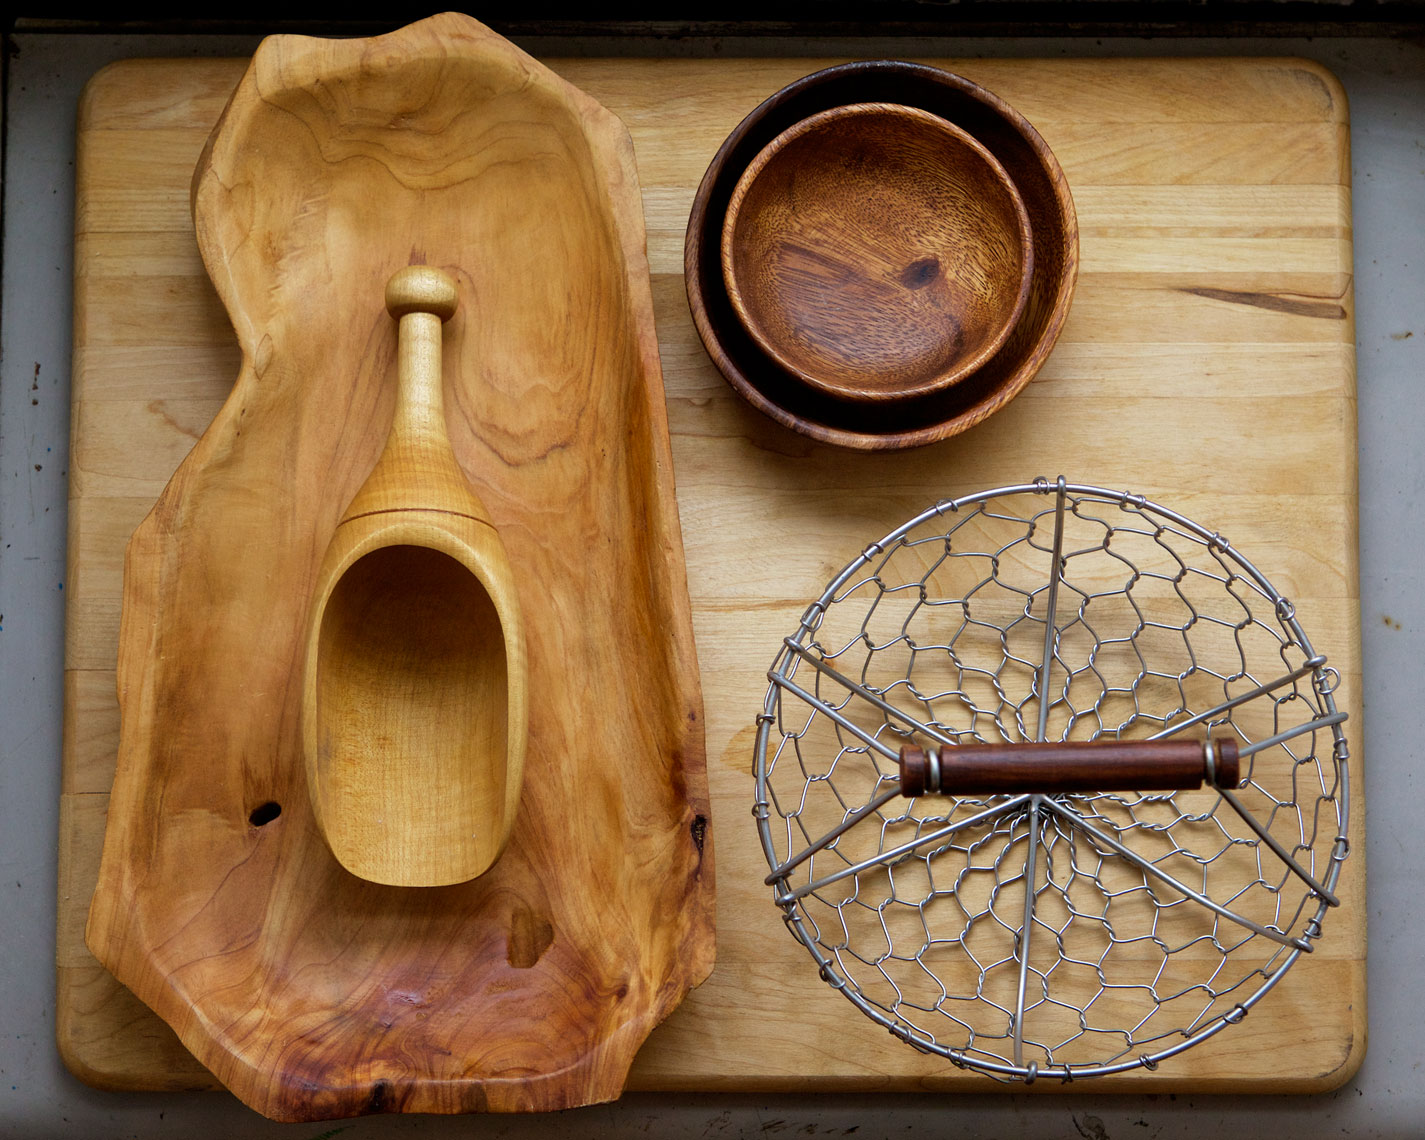 Still Life of Handcrafted Wood Housewares.